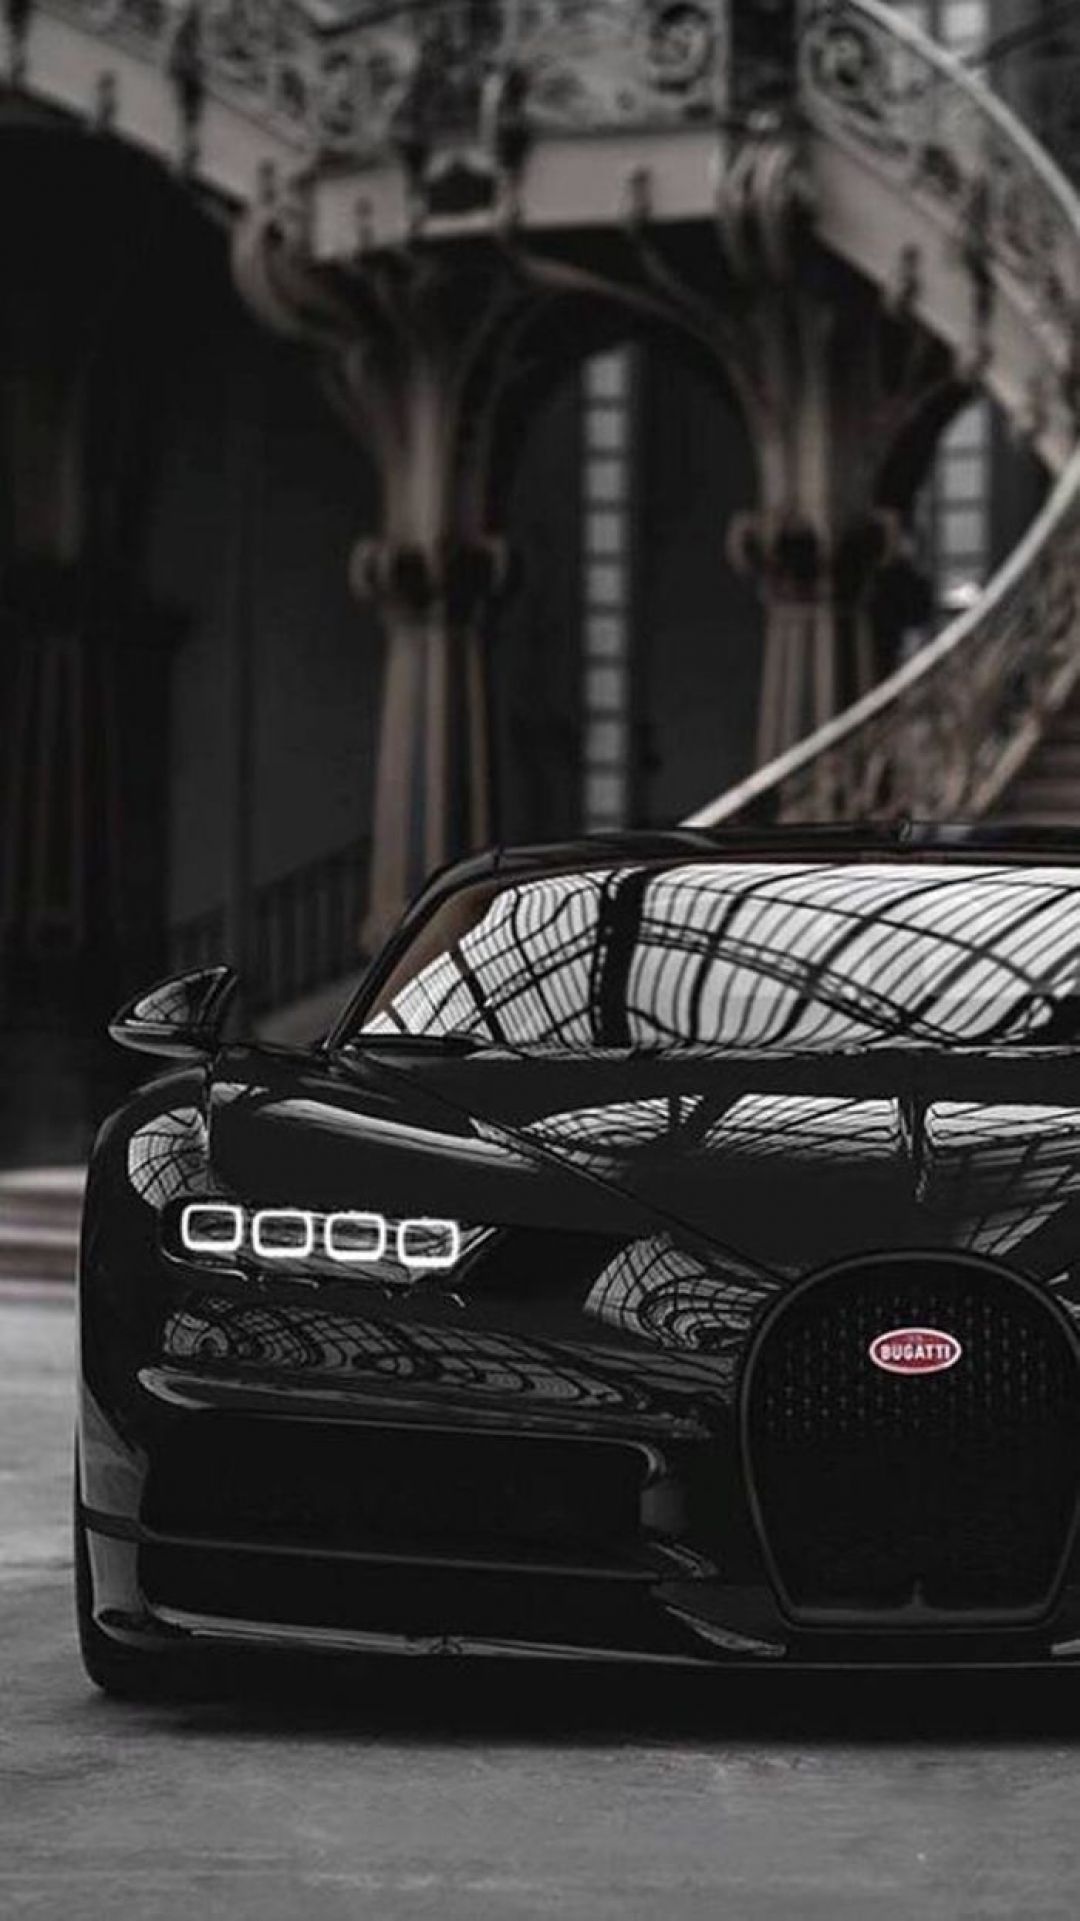 ✓[95+] Bugatti Chiron phone wallpaper - Android / iPhone HD Wallpaper  Background Download (png / jpg) (2023)